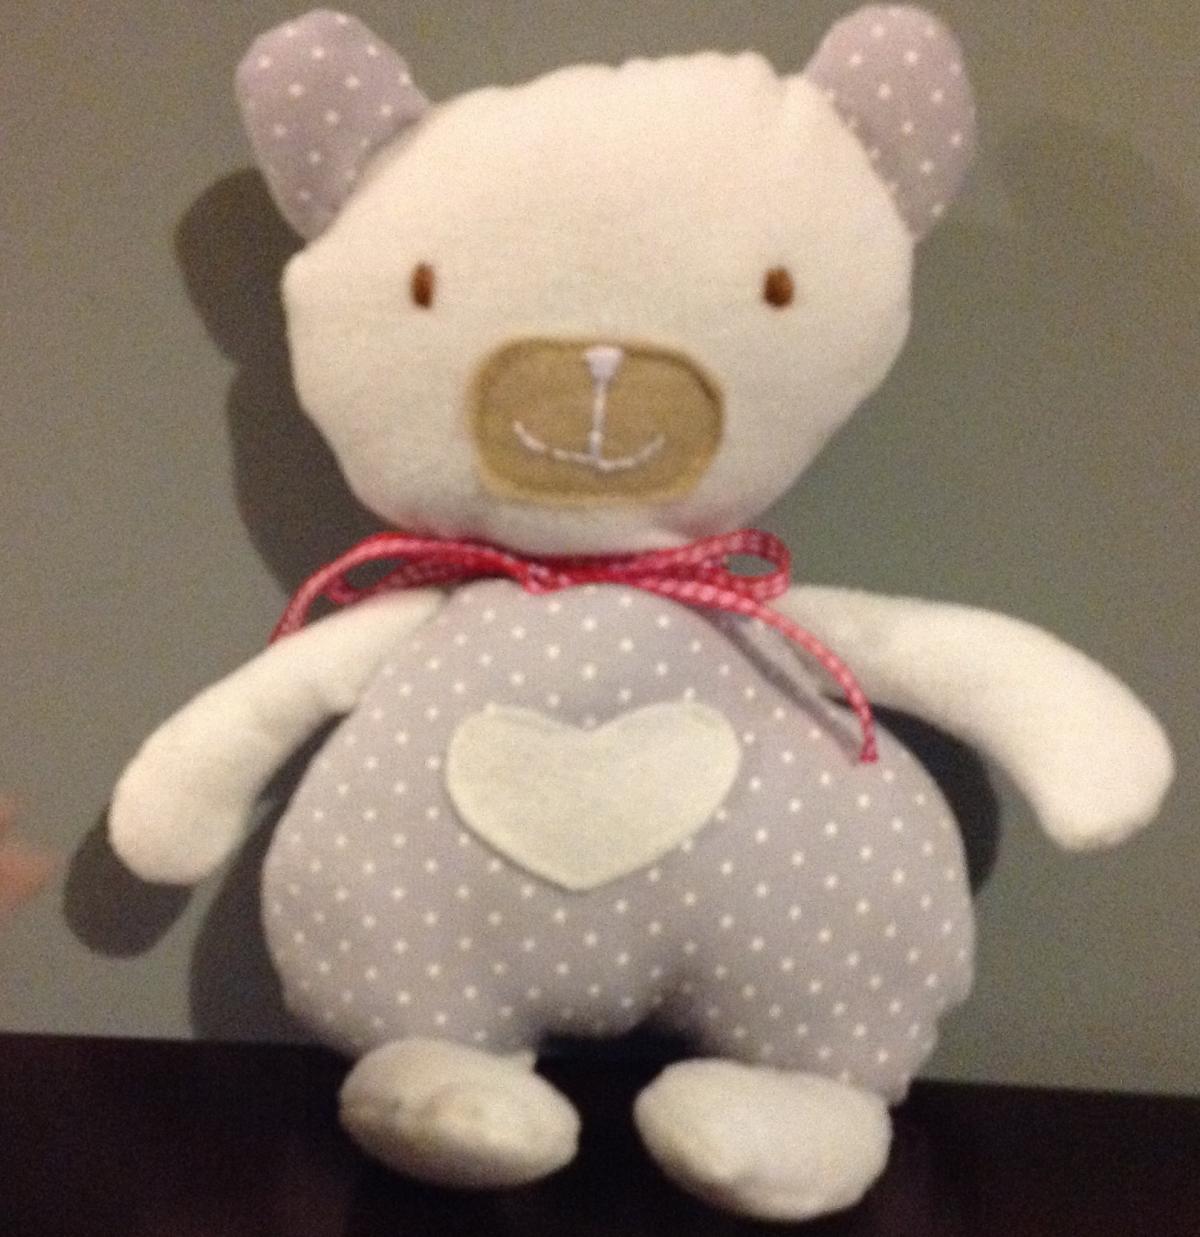 Baby Personalised Teddy. Handmade Gift For Babies, Baby Shower, Christenings, Christmas, Baby Girl Or Boy, Unisex